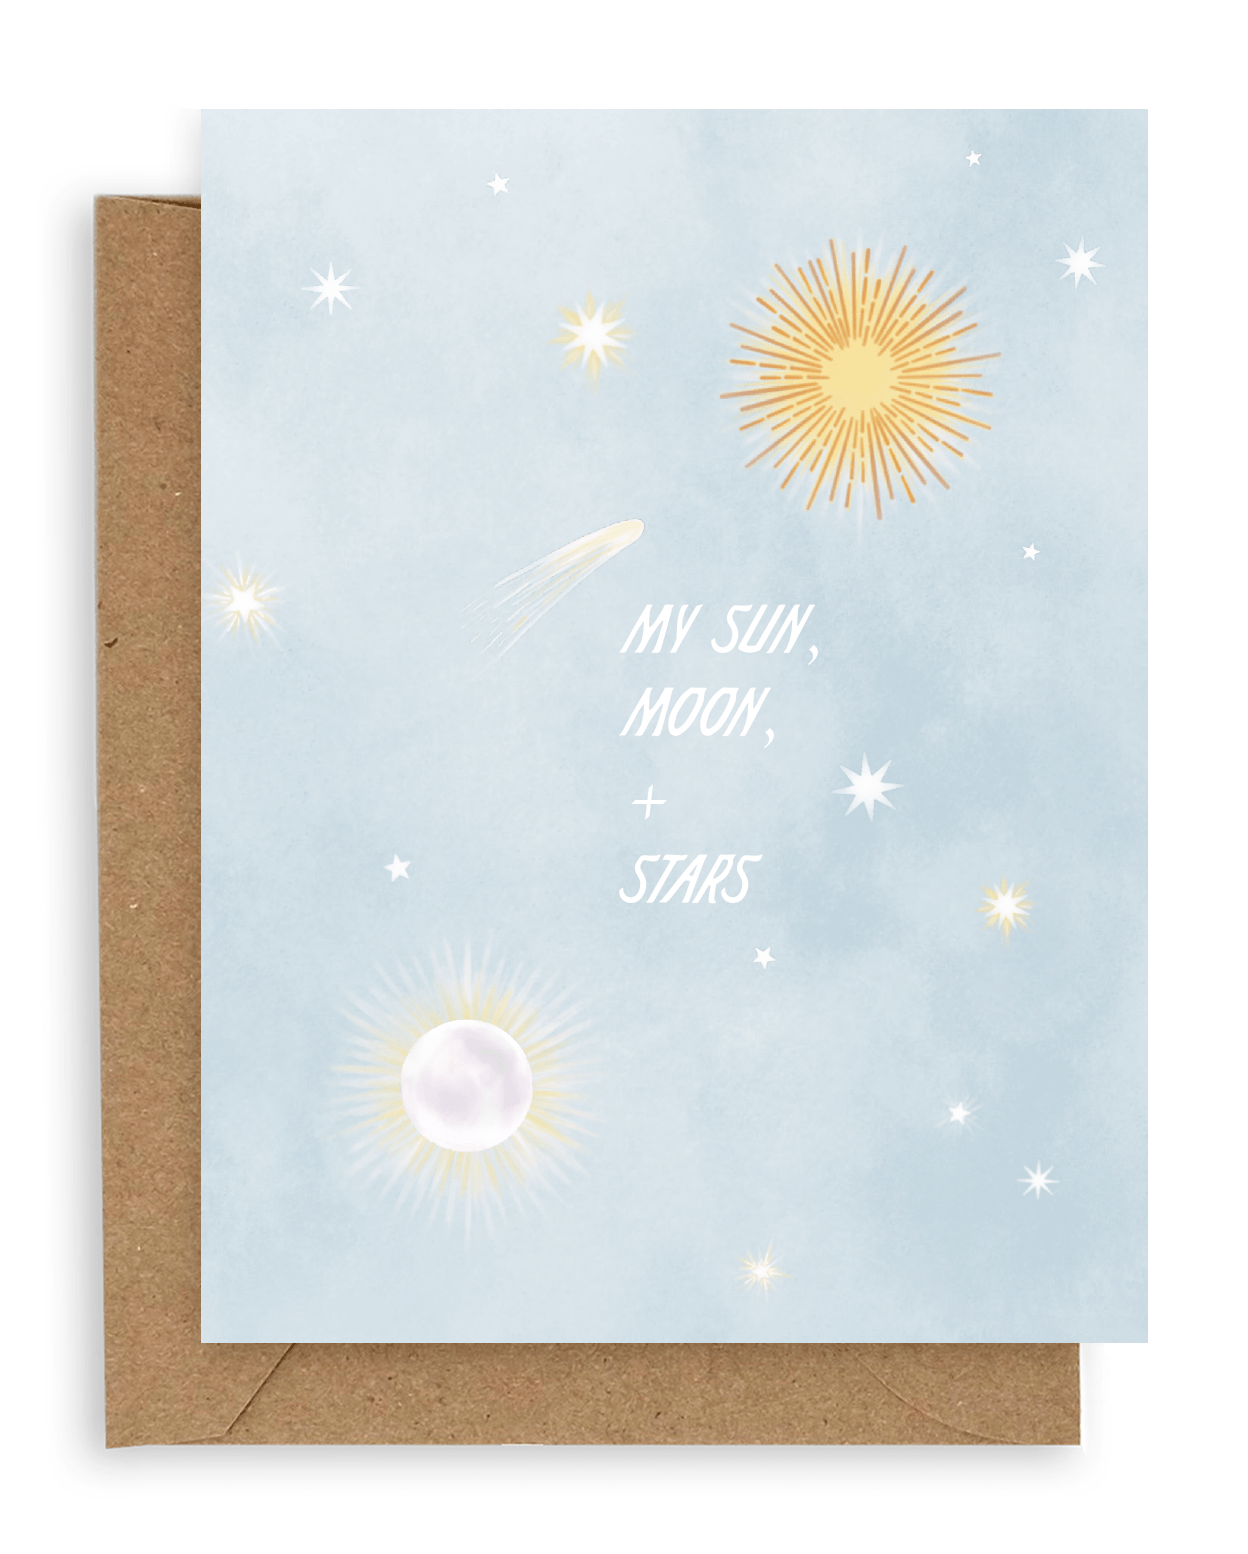 Blue sky with sun, moon, stars and text that reads &quot;My Sun, Moon, + Stars.&quot; Shown with kraft envelope.